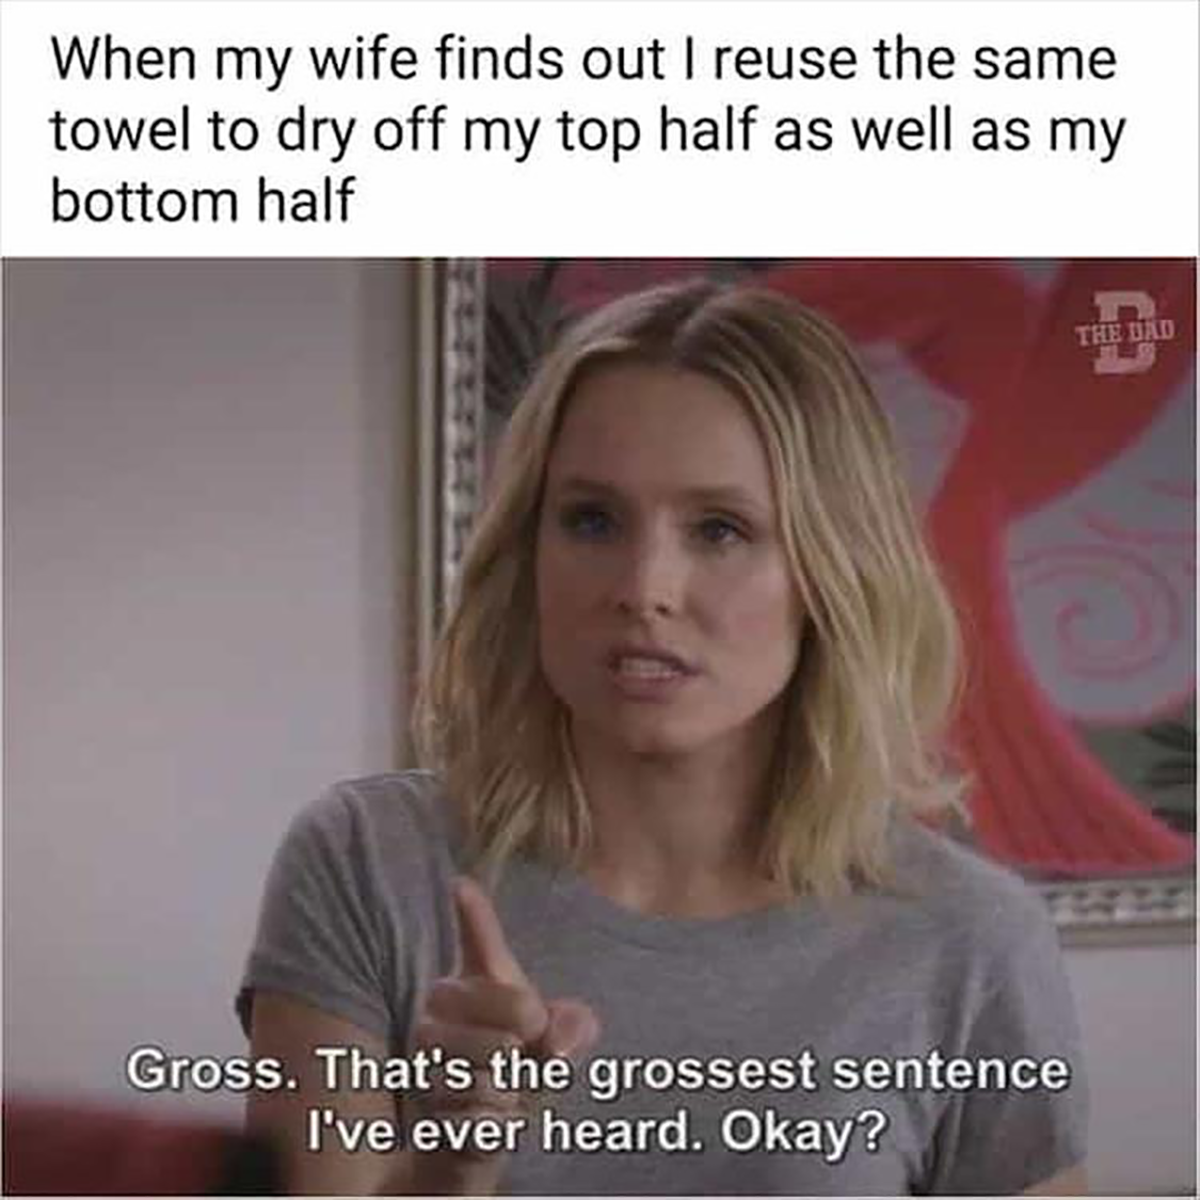 monday memes - blond - When my wife finds out I reuse the same towel to dry off my top half as well as my bottom half Gross. That's the grossest sentence I've ever heard. Okay? The Dad